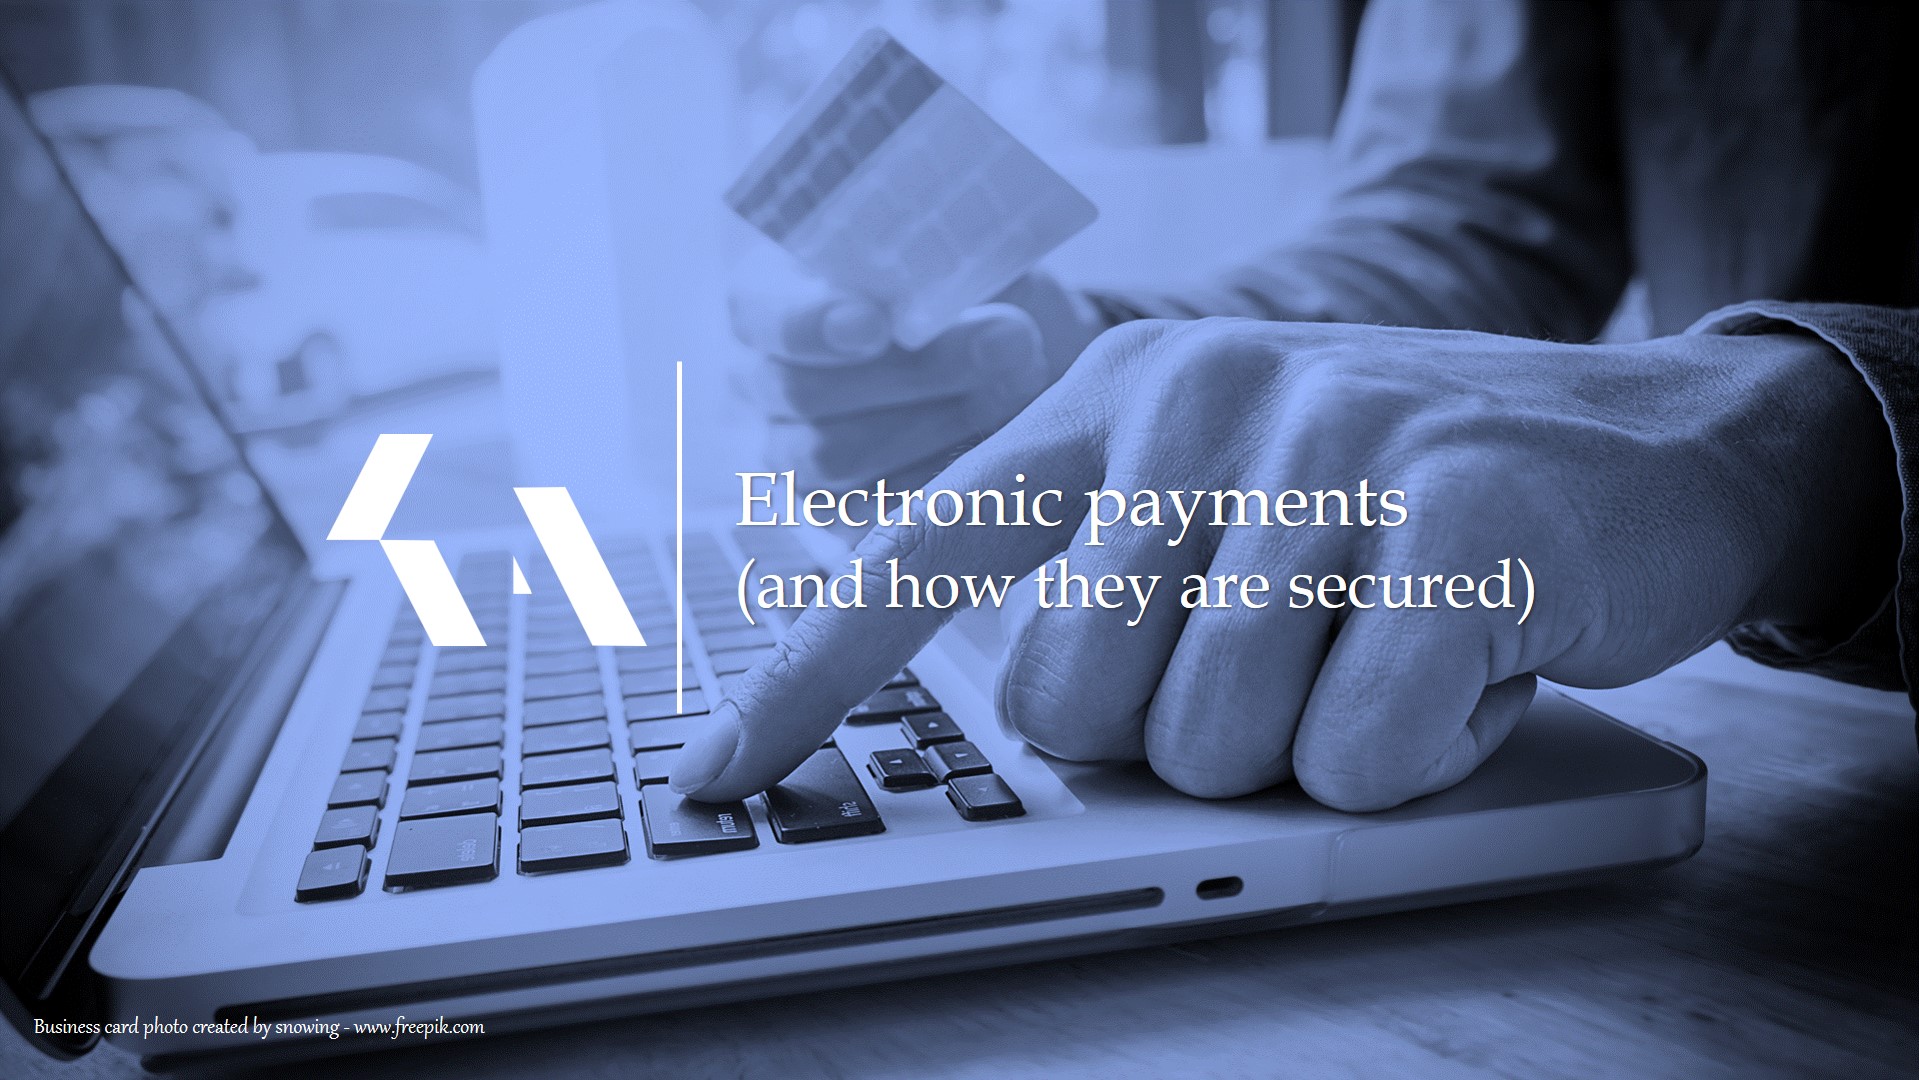 Electronic payments (and how they are secured)